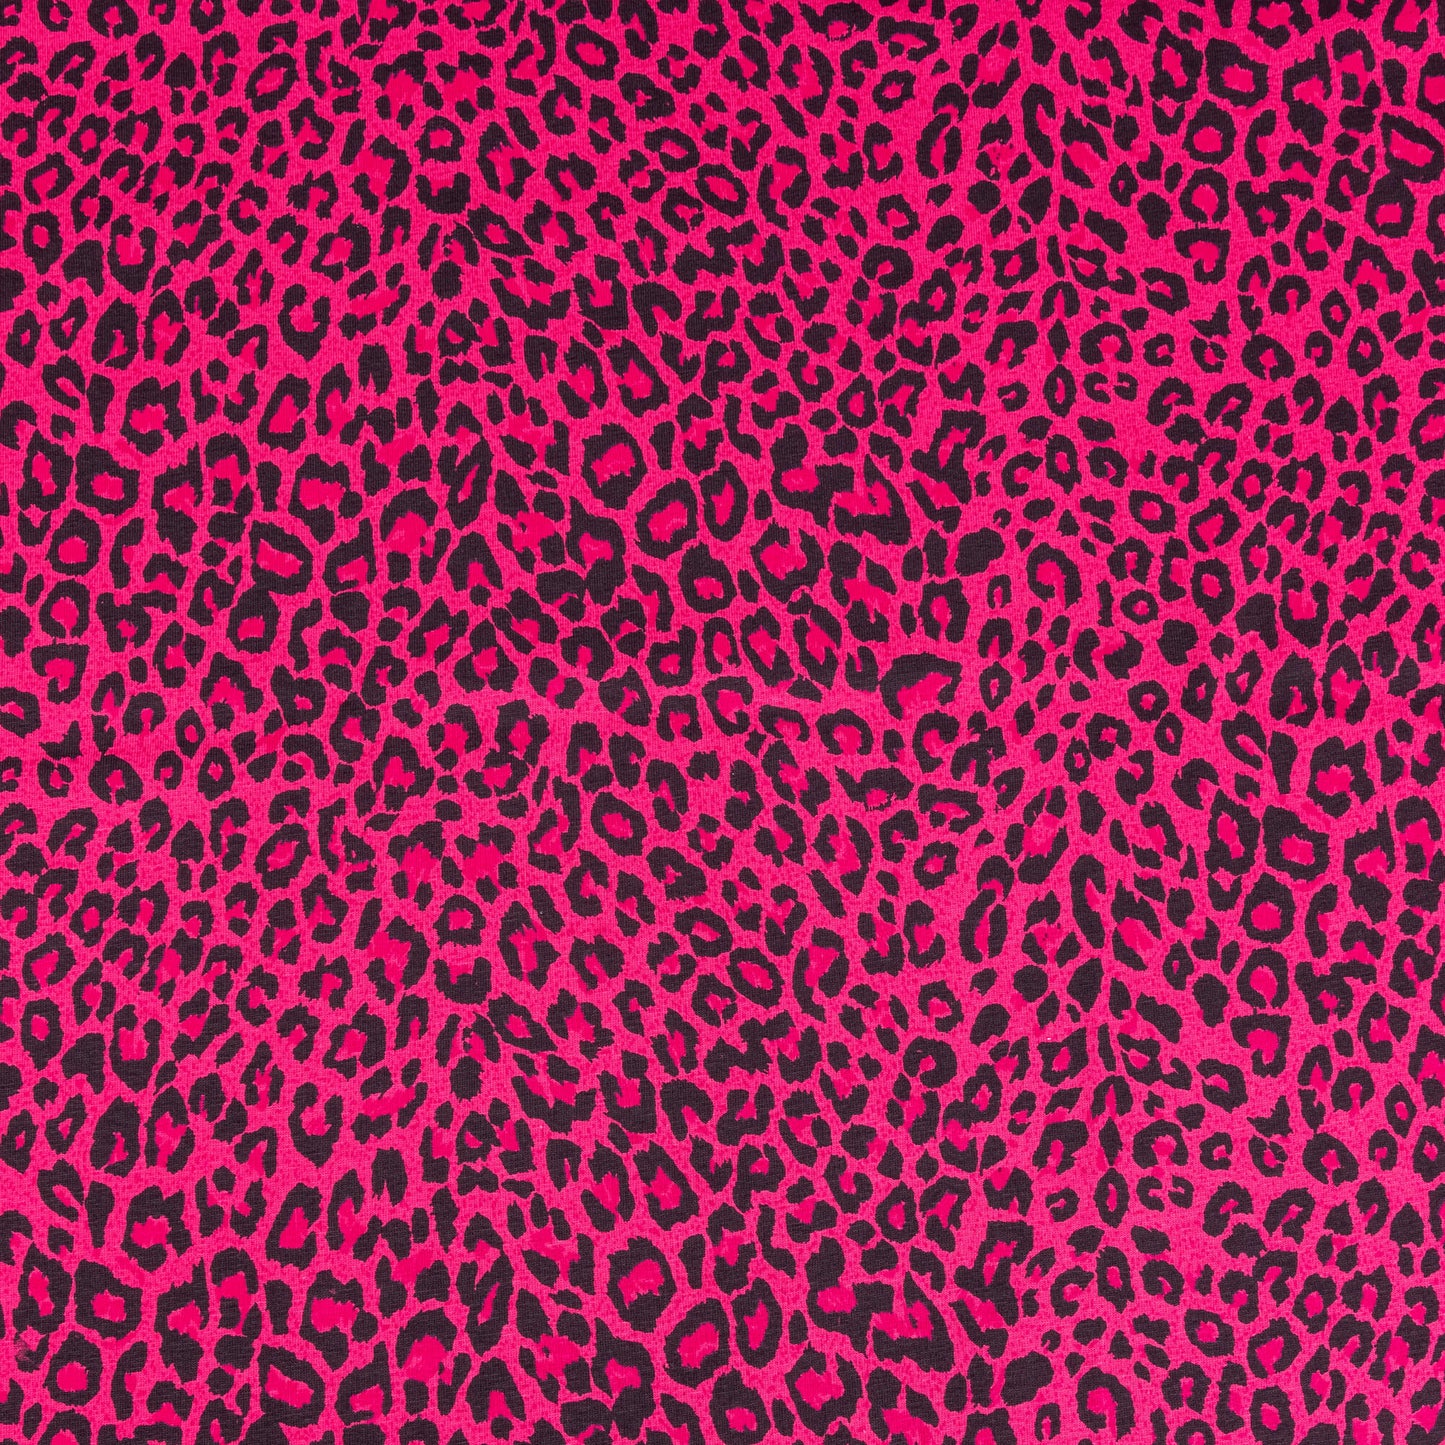 A wide of bright pink and black leopard print fabric in a soft jersey t-shirt weight perfect for crafting